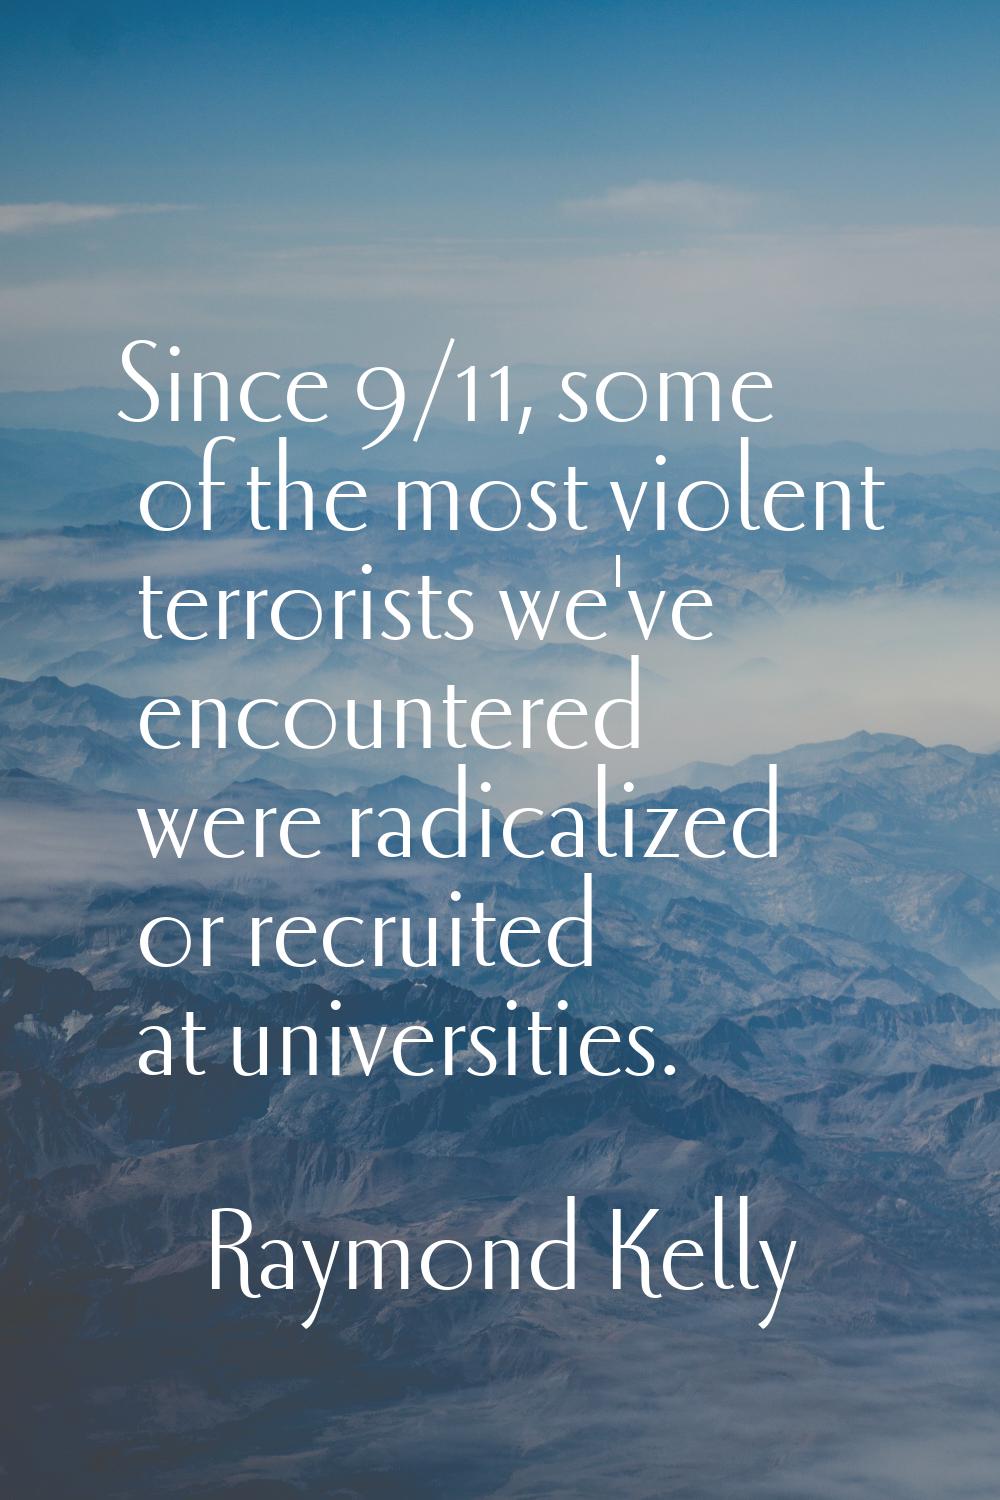 Since 9/11, some of the most violent terrorists we've encountered were radicalized or recruited at 